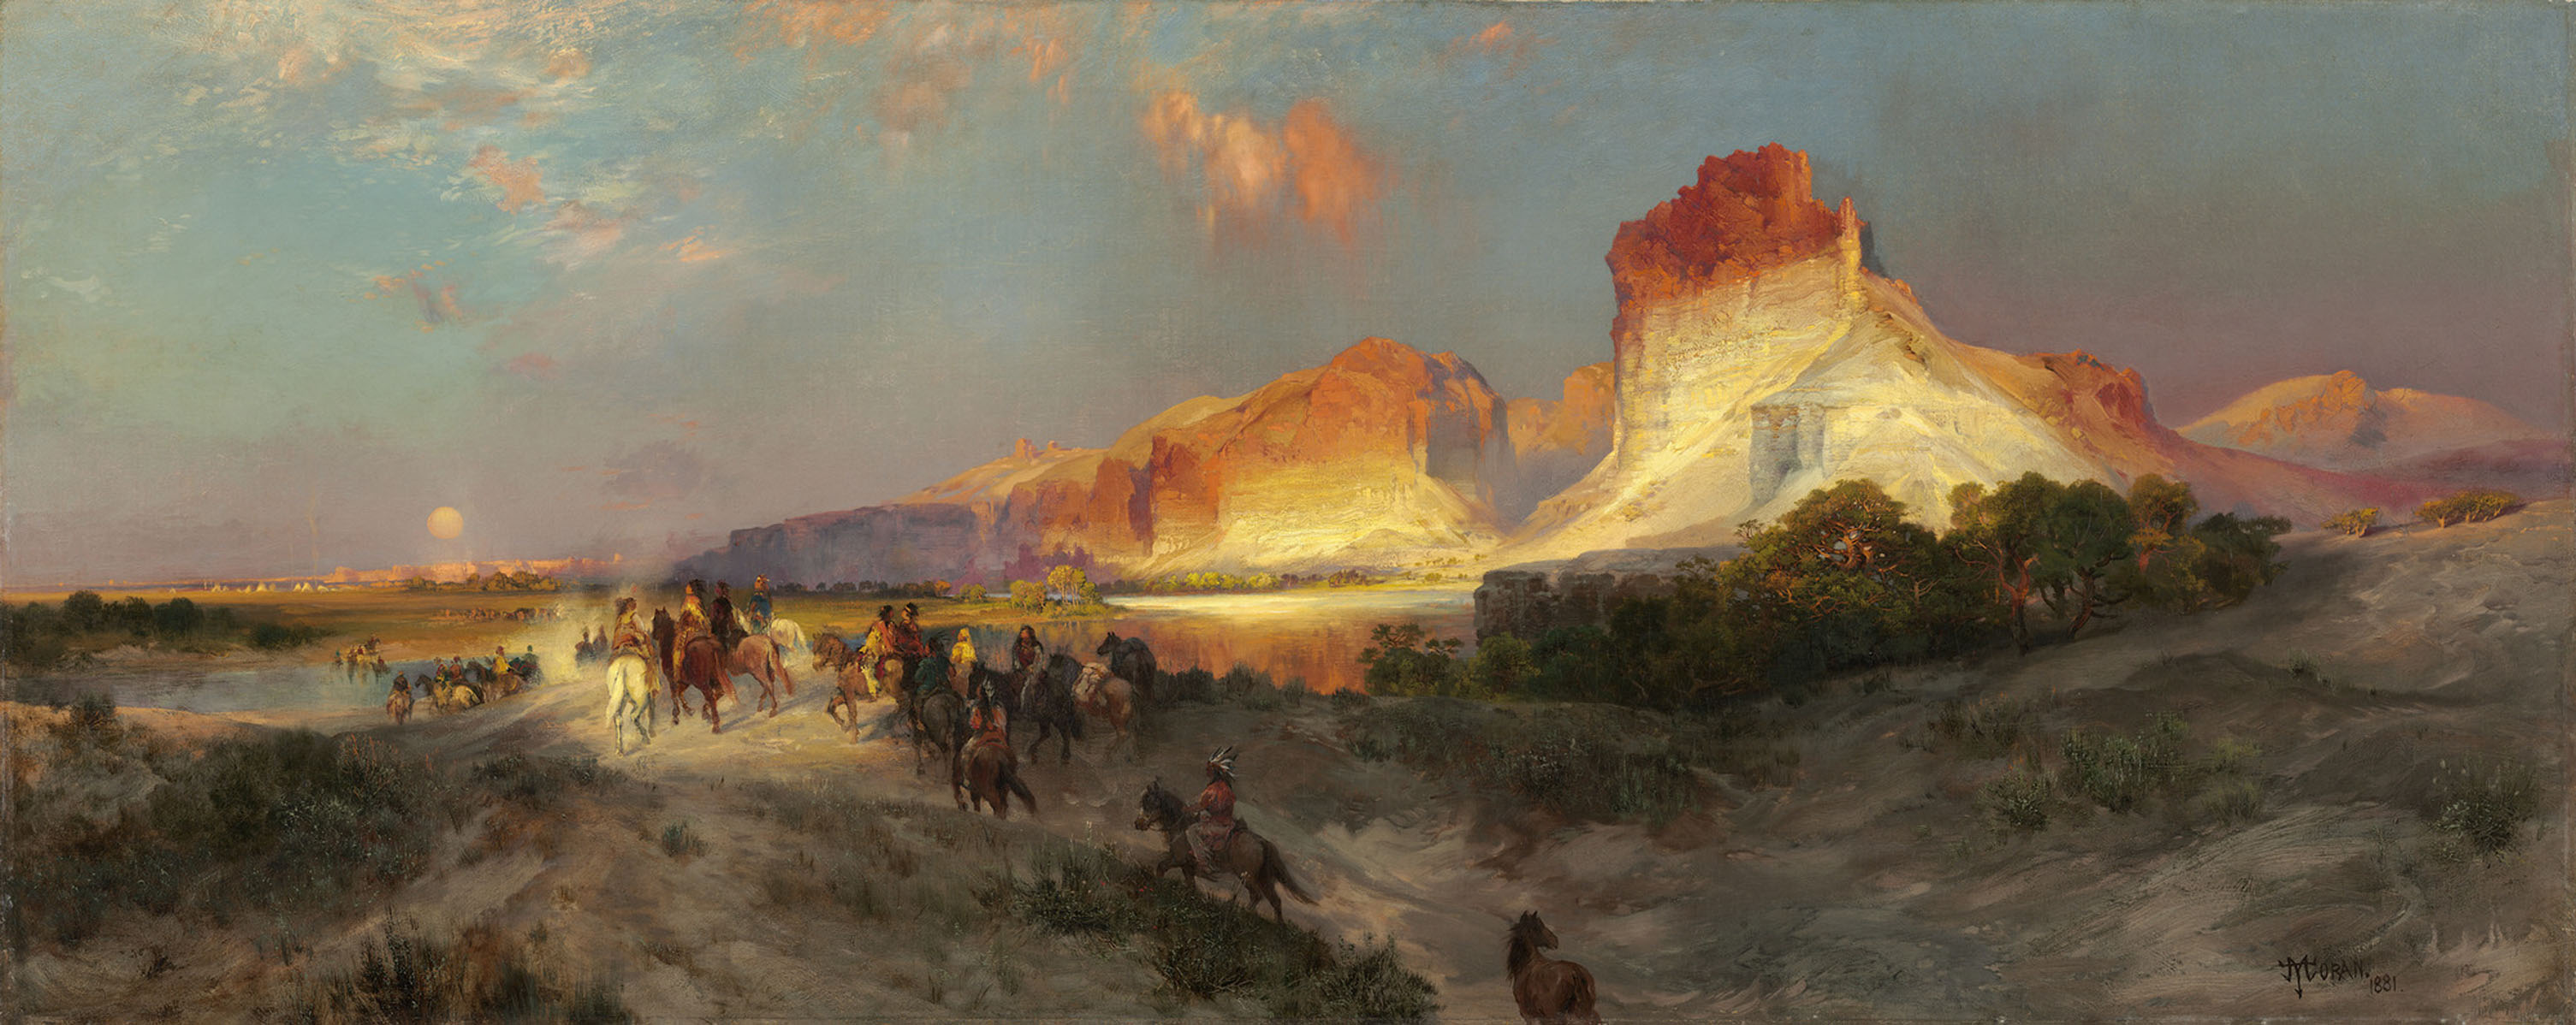 Thomas Moran (American, 1837 - 1926 ), Green River Cliffs, Wyoming, 1881, oil on canvas, Gift of the Milligan and Thomson Families